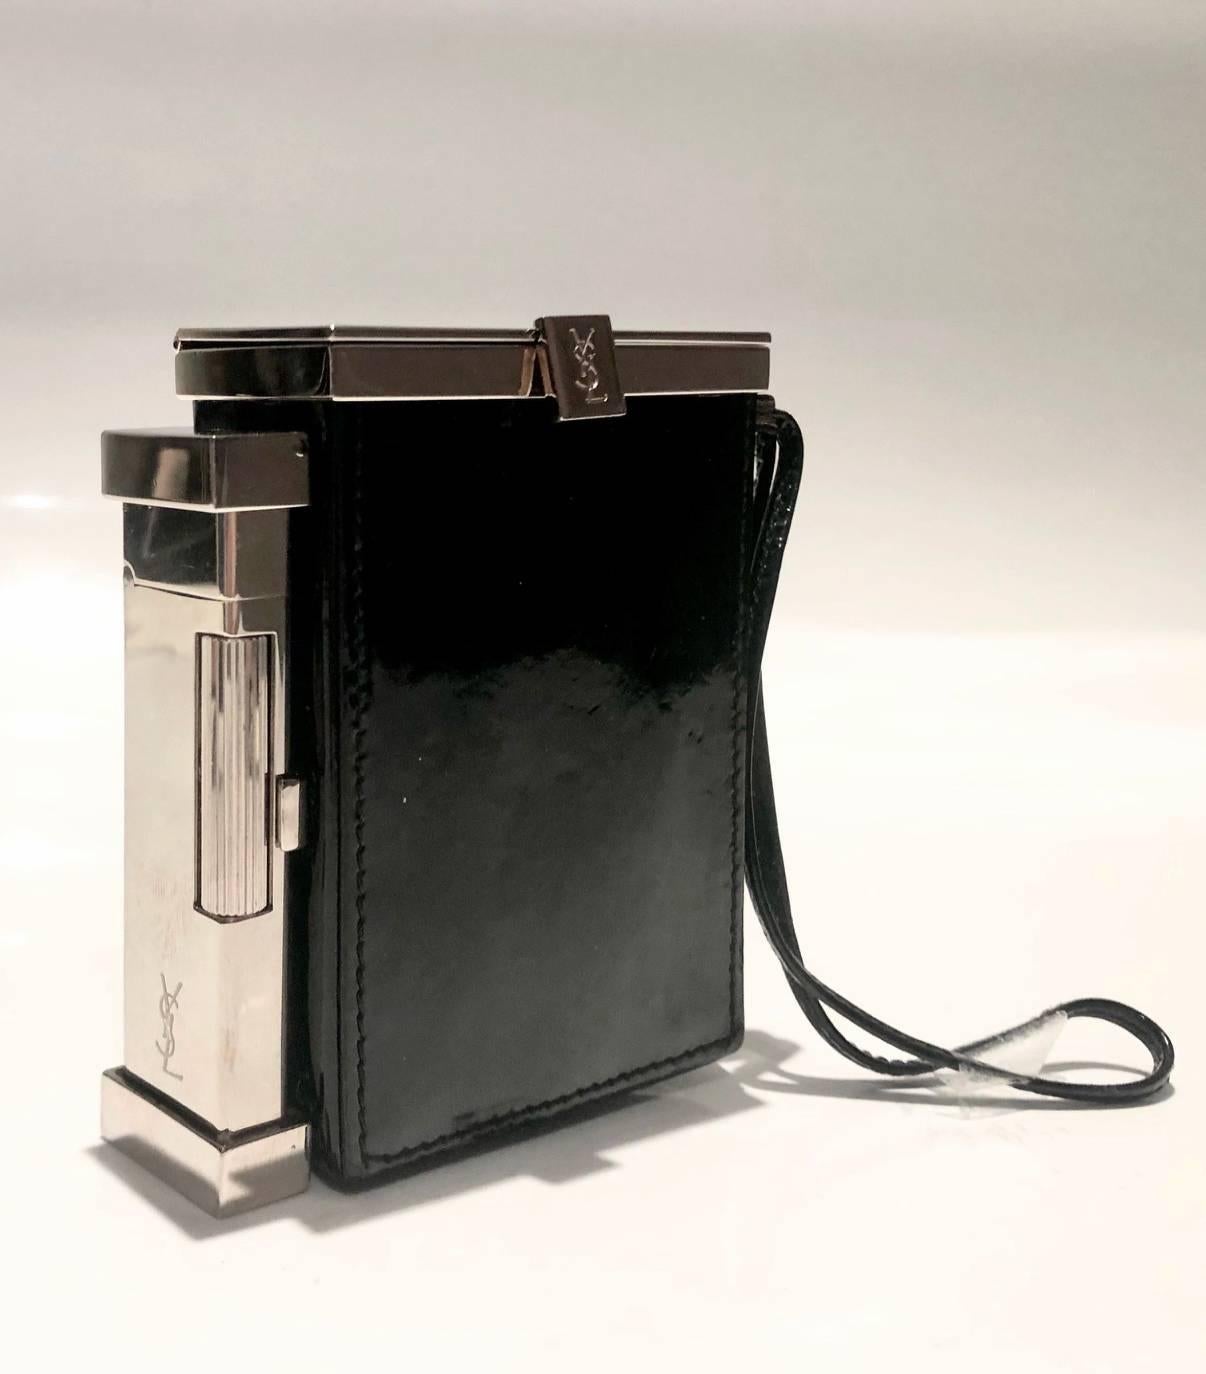 YVES SAINT LAURENT SMOKING BOX WITH LIGHTER
Amazing vintage smoking box and purse from Yves Saint Laurent designed by Tom Ford in the late 90s/early 00s. Silver tone metal ware, black patent leather, clutch closure with logo details, silver tine